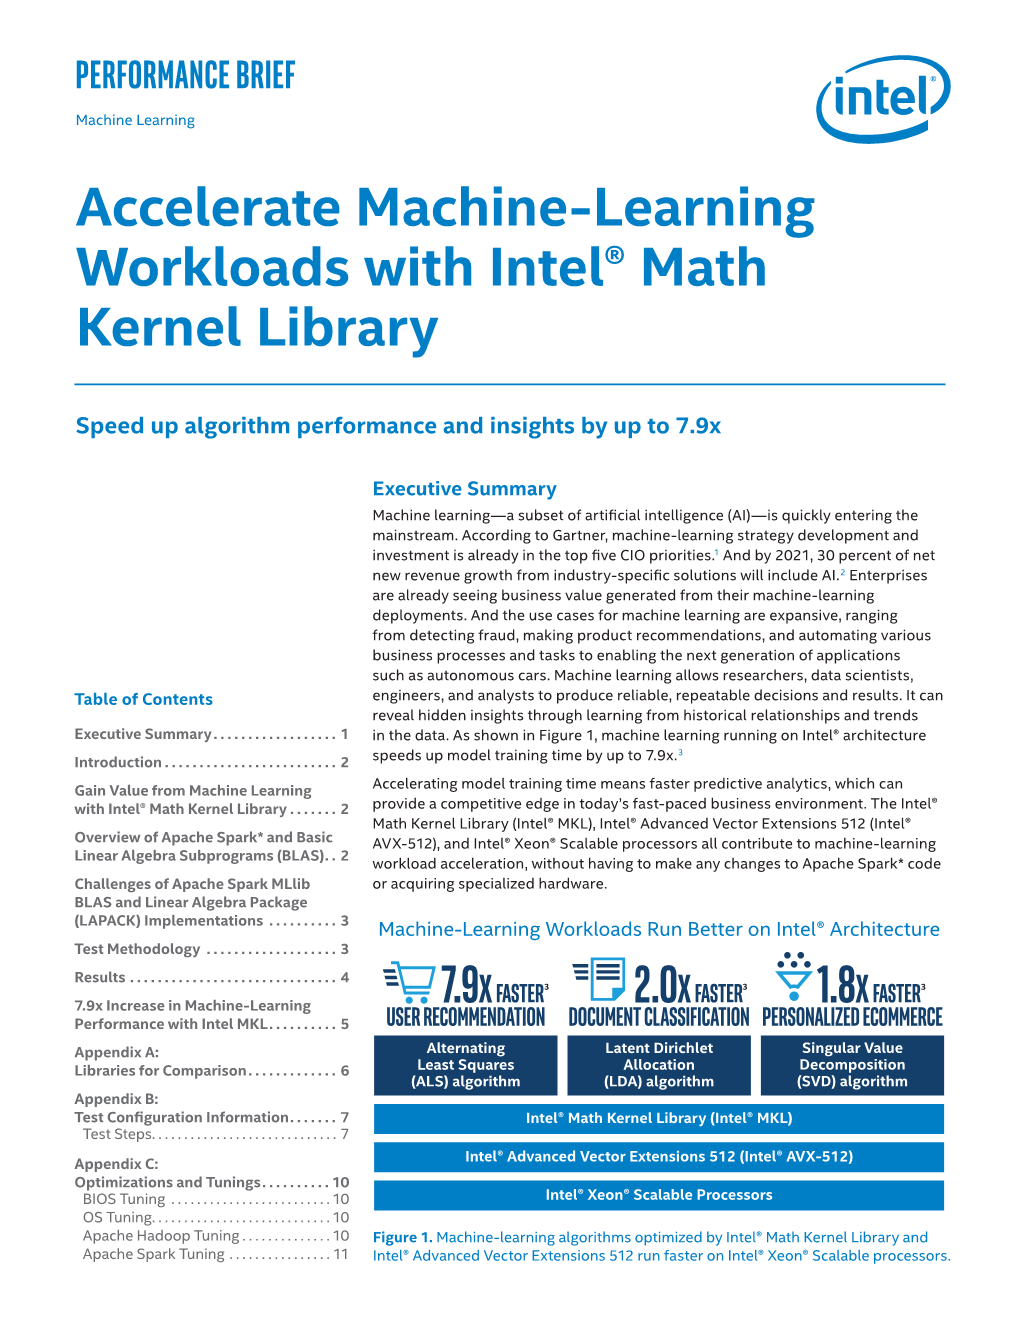 Accelerate Machine-Learning Workloads with Intel® Math Kernel Library (Intel® MKL)